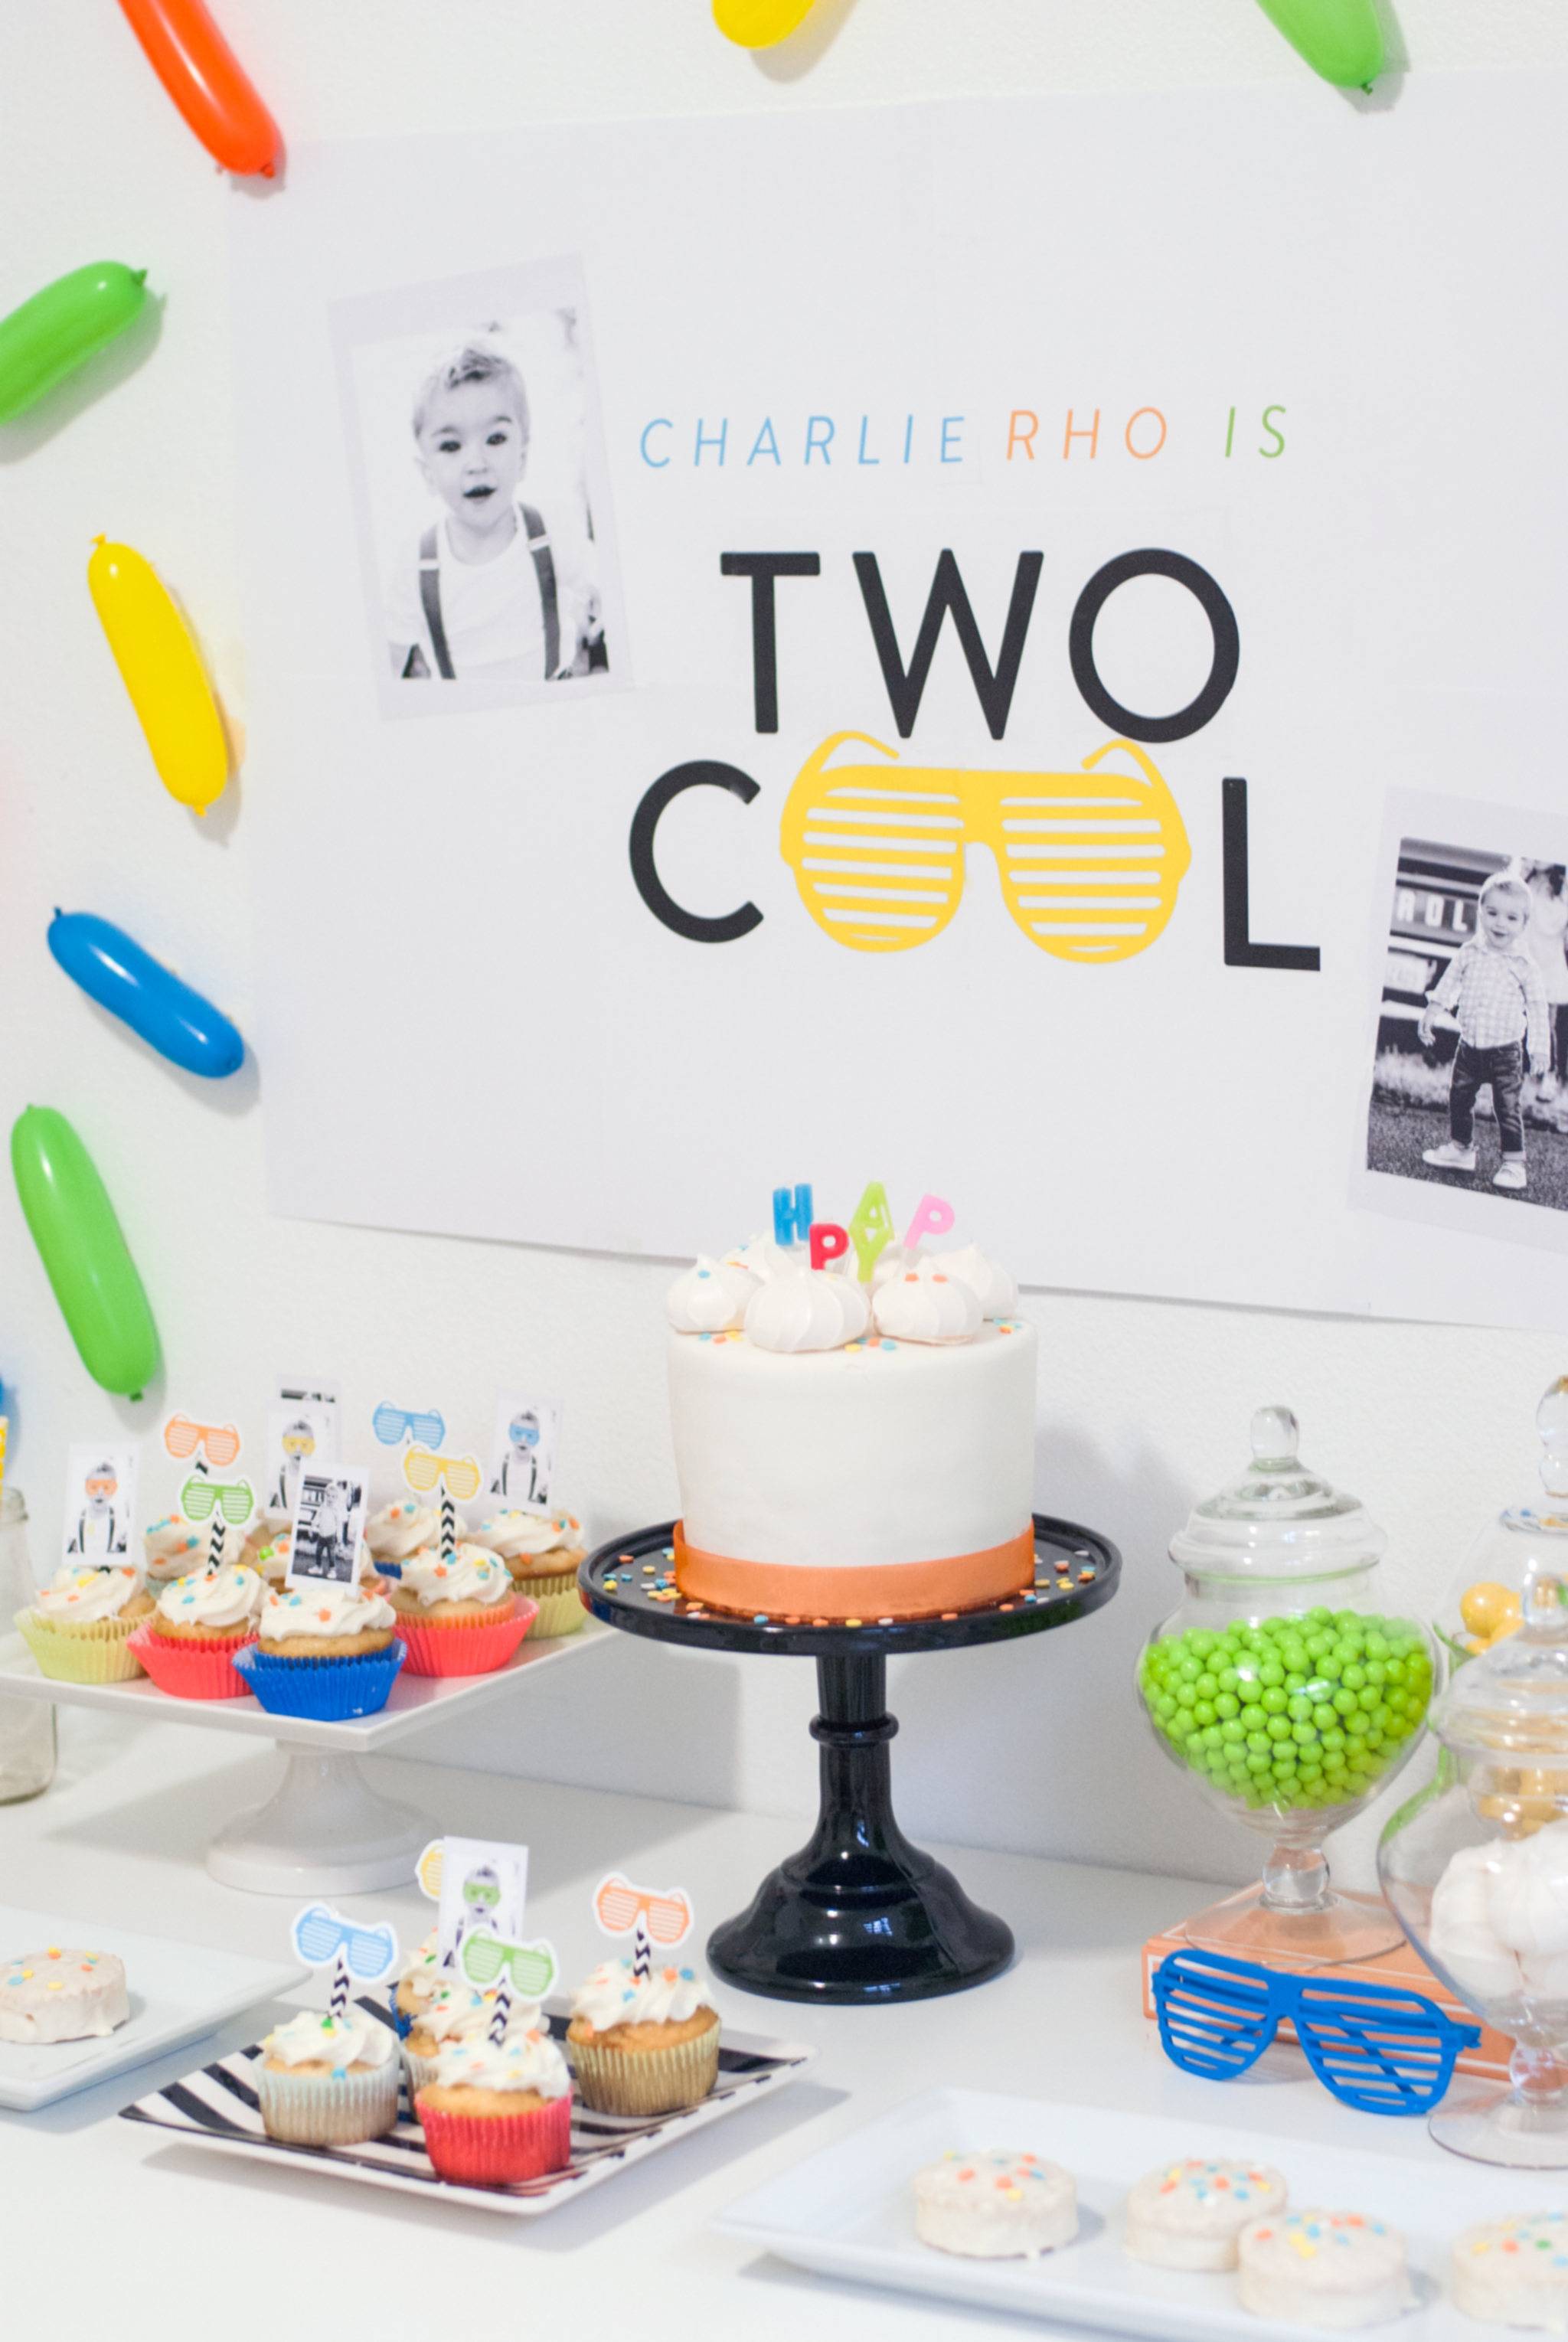 a-two-cool-birthday-party-that-ll-have-you-reaching-for-your-sunglasses